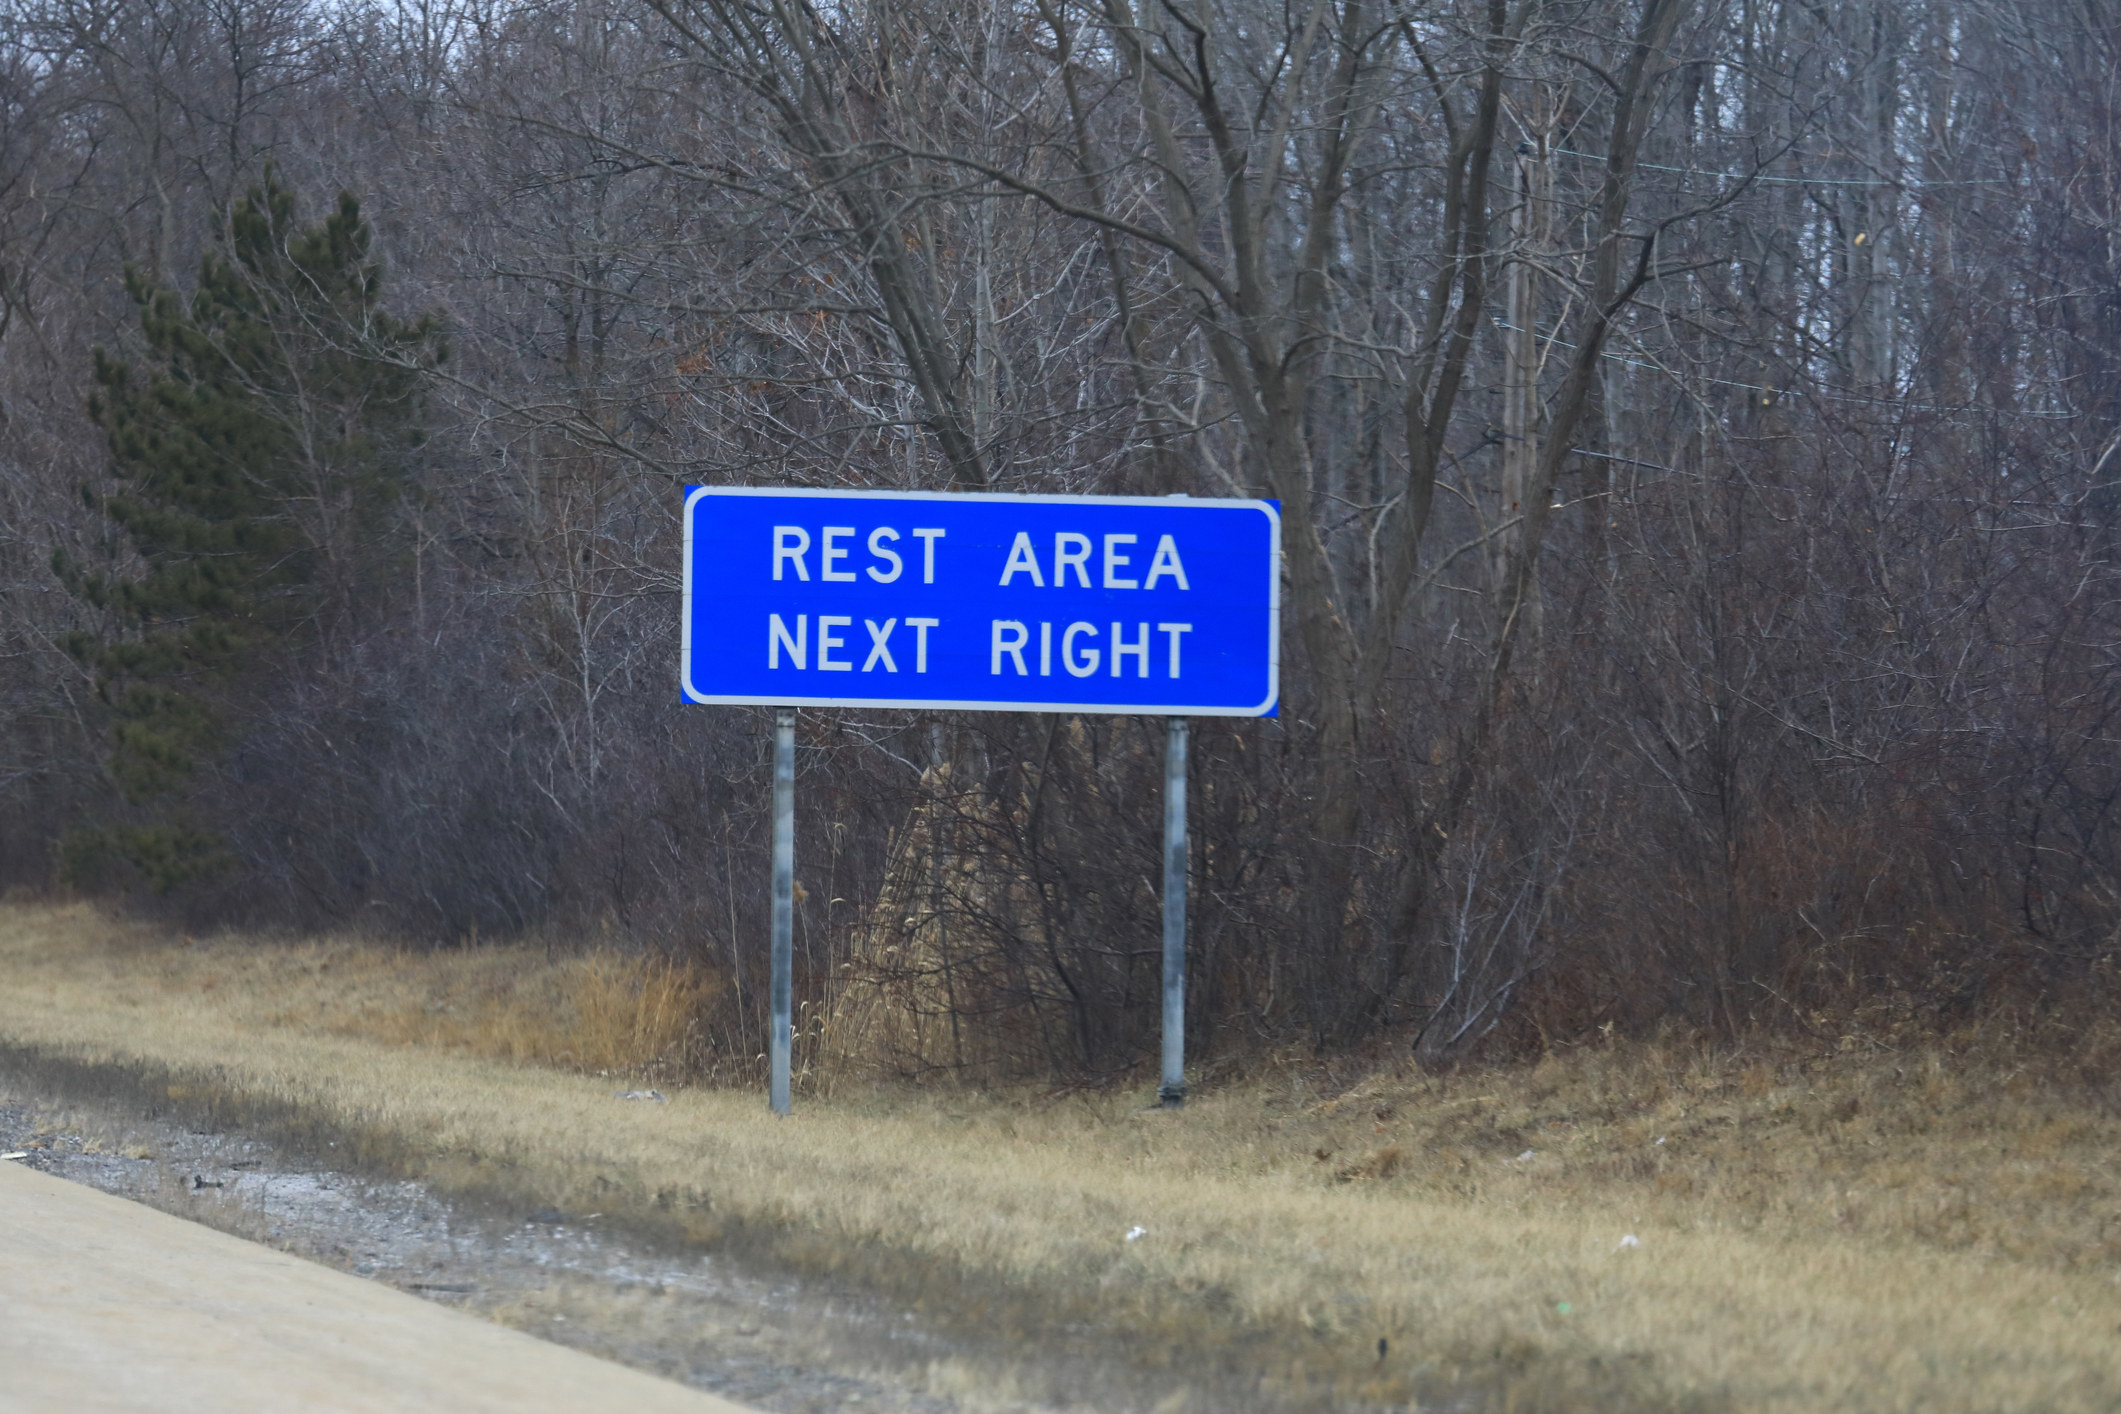 A sign for a rest area